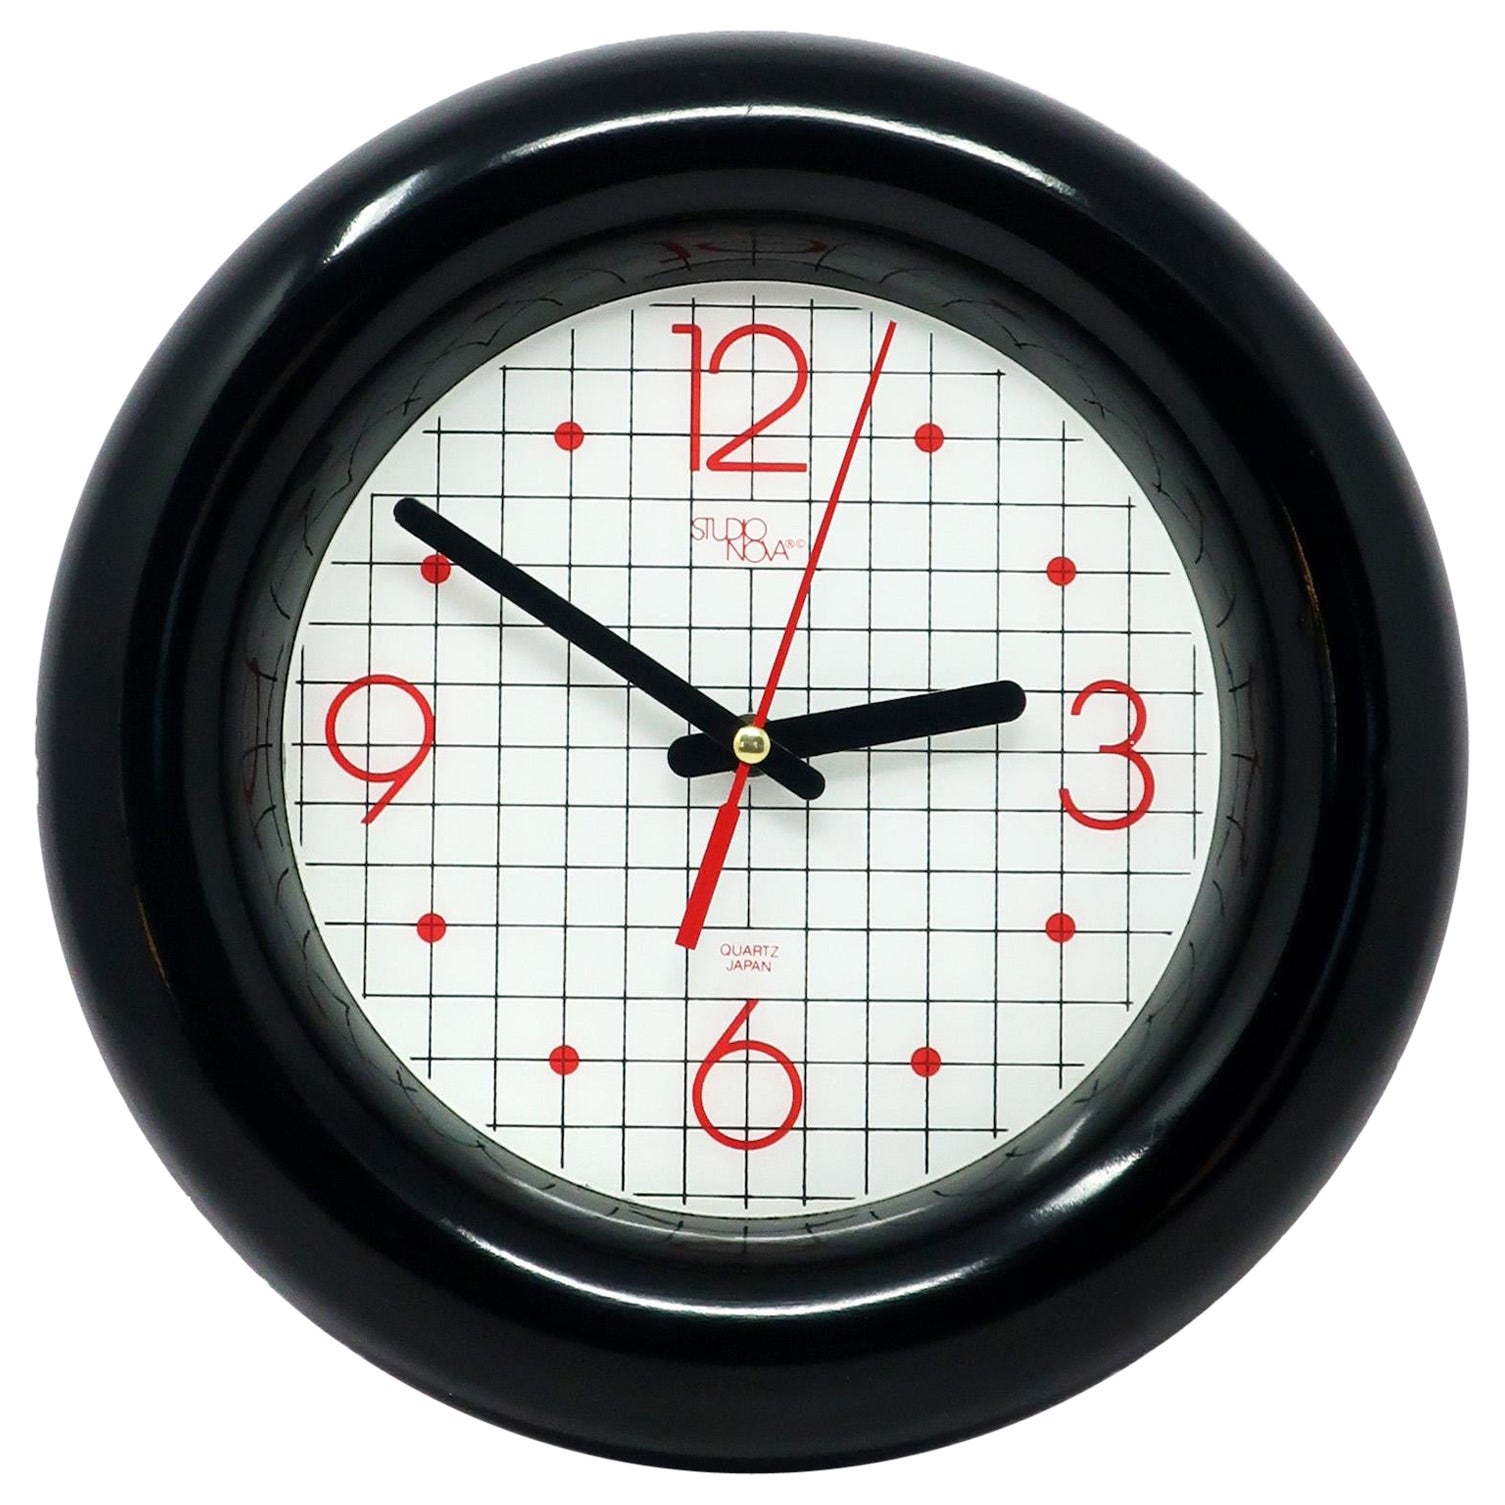 1980s Graphic Wall Clock by Studio Nova Japan For Sale